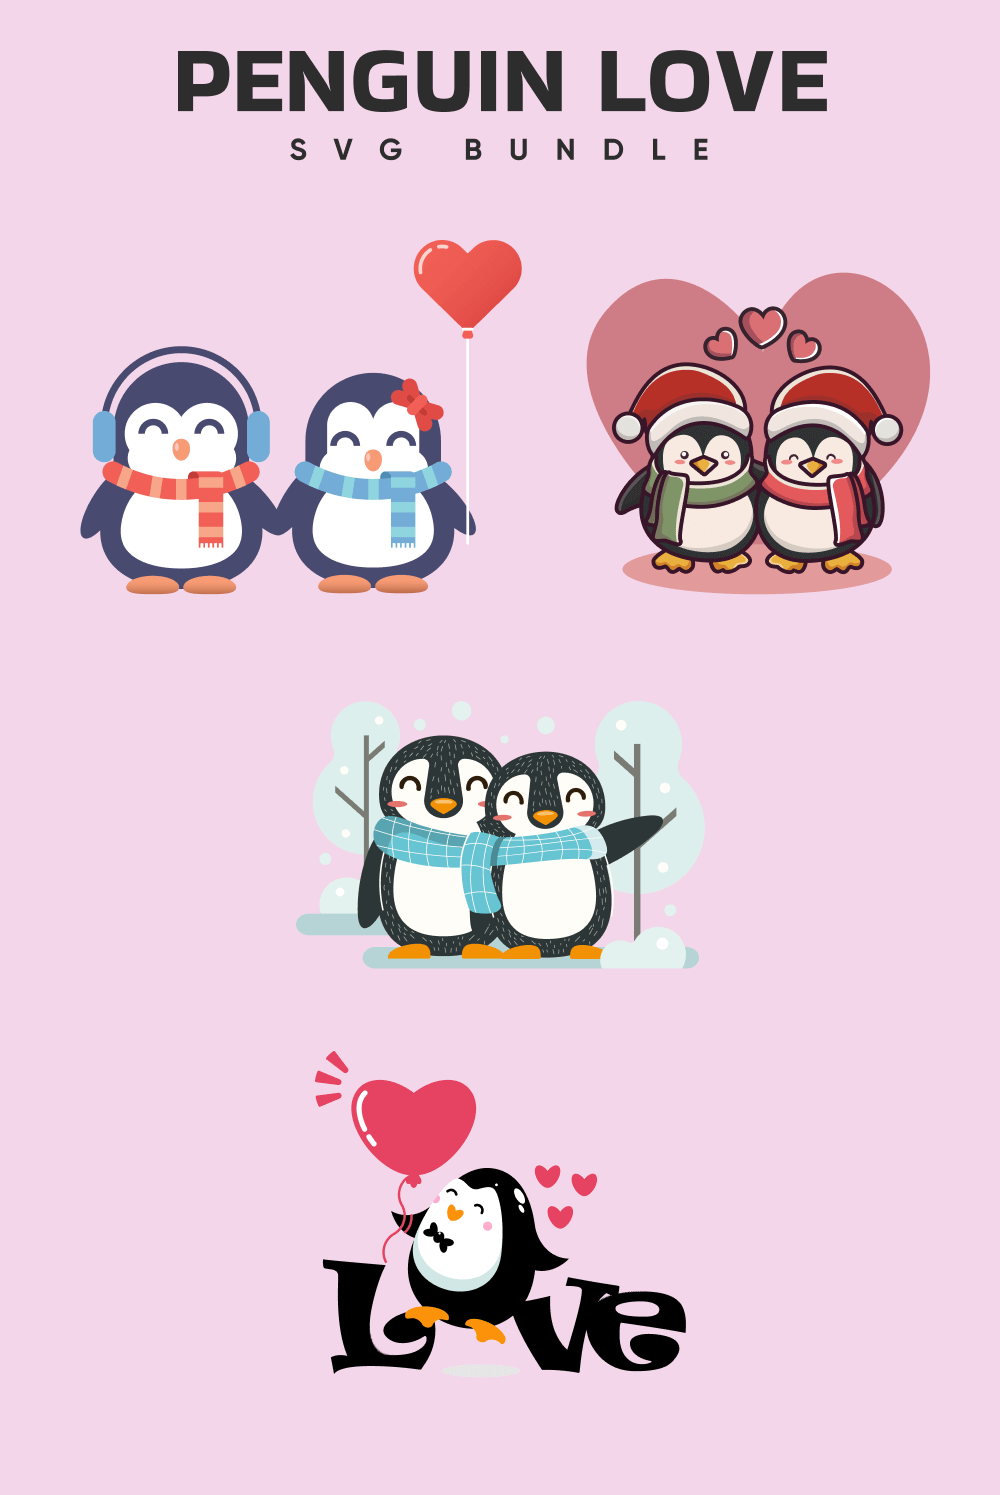 Penguins in winter scarves on a background of hearts.